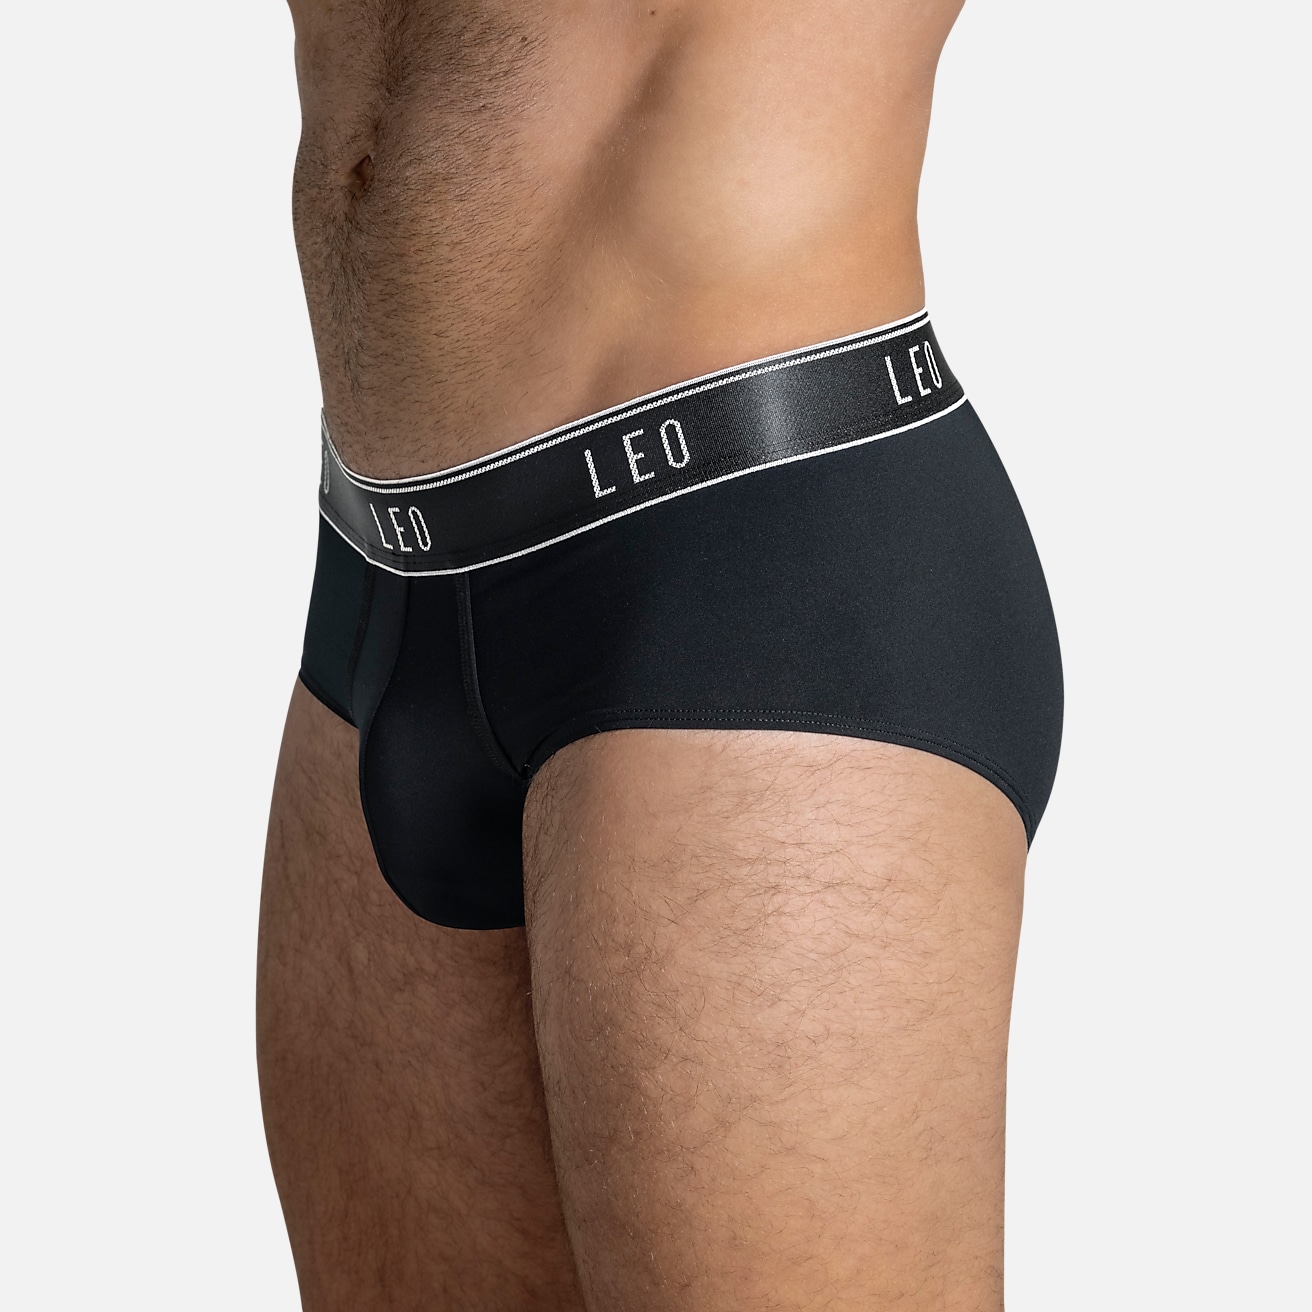 Calvin Klein Boxers for Men, Online Sale up to 70% off